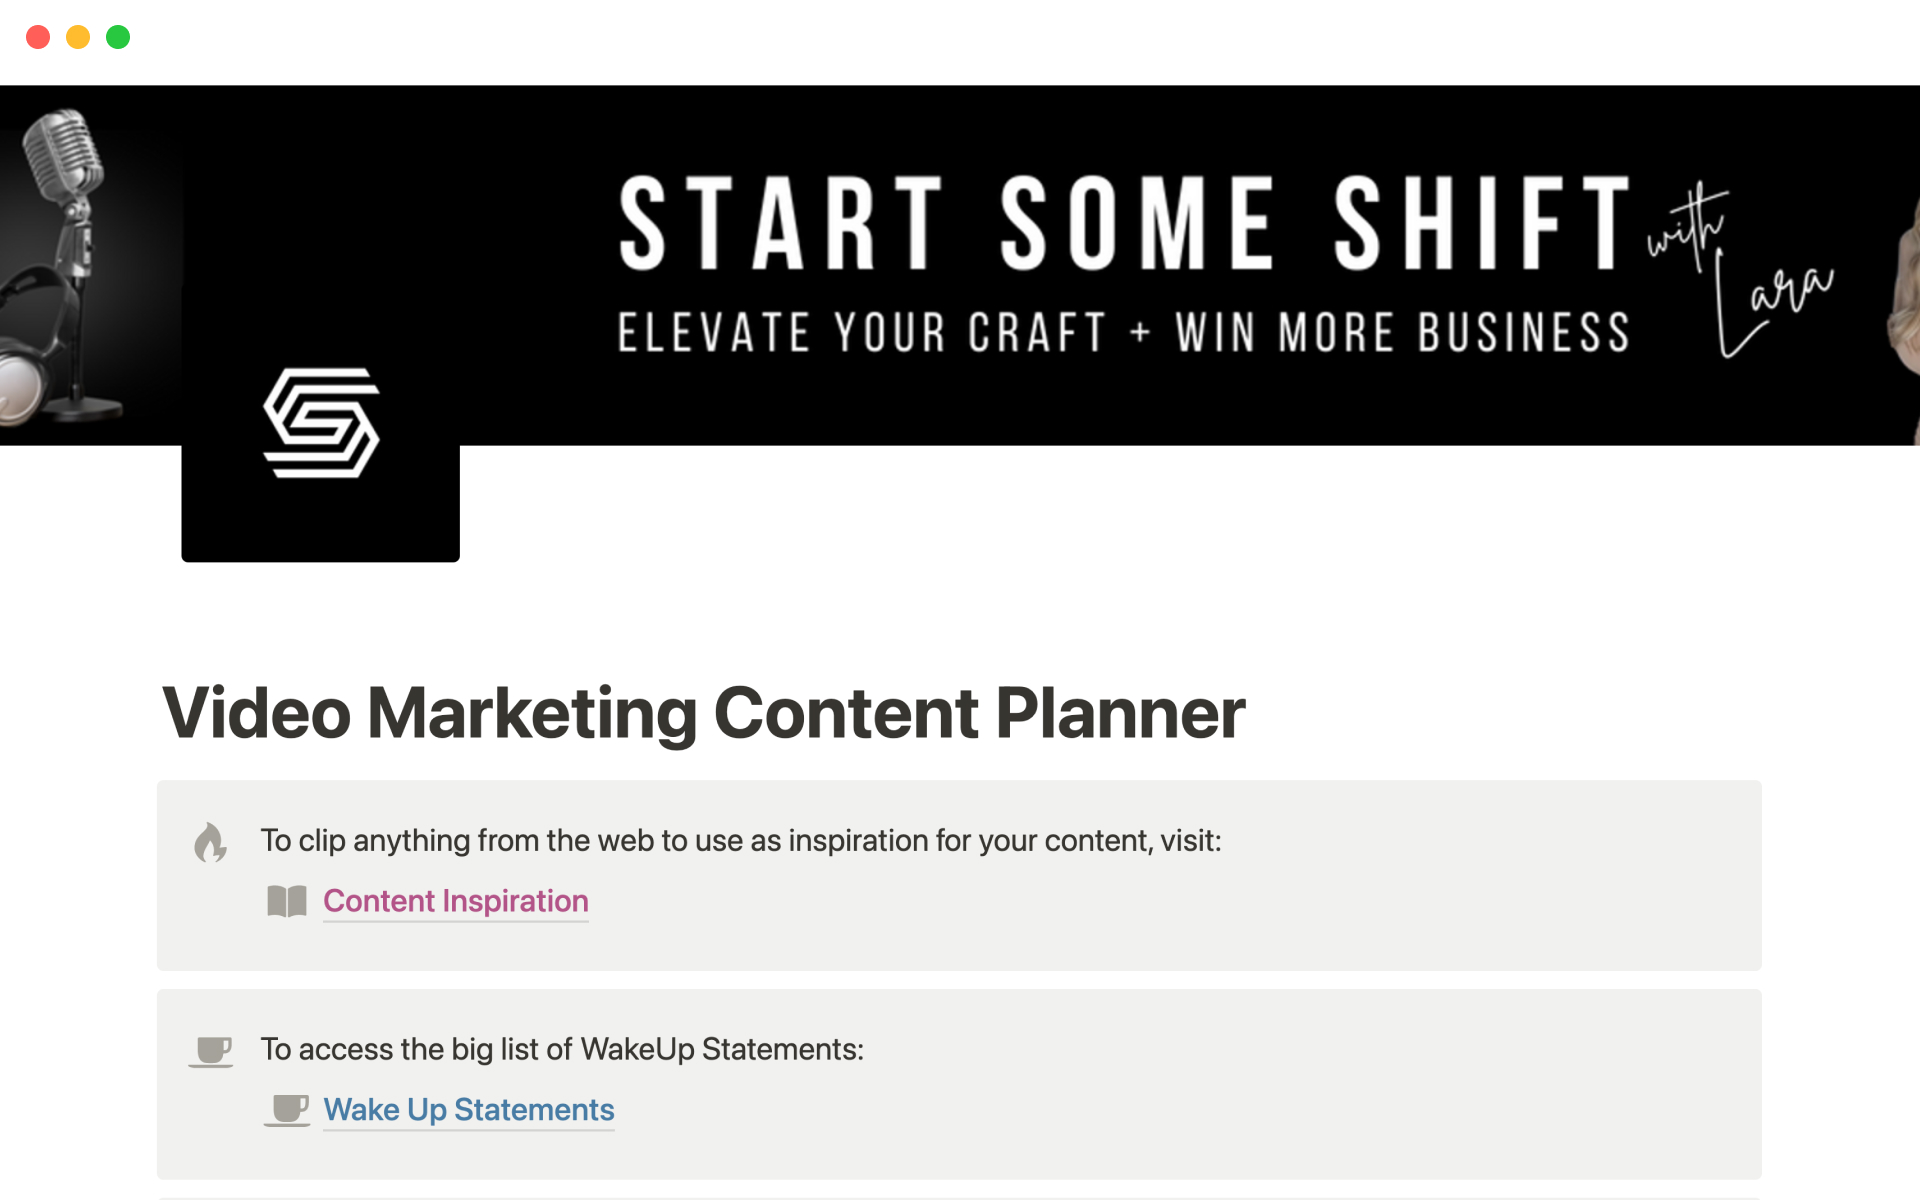 Everything you need to plan, script and manage your video content.